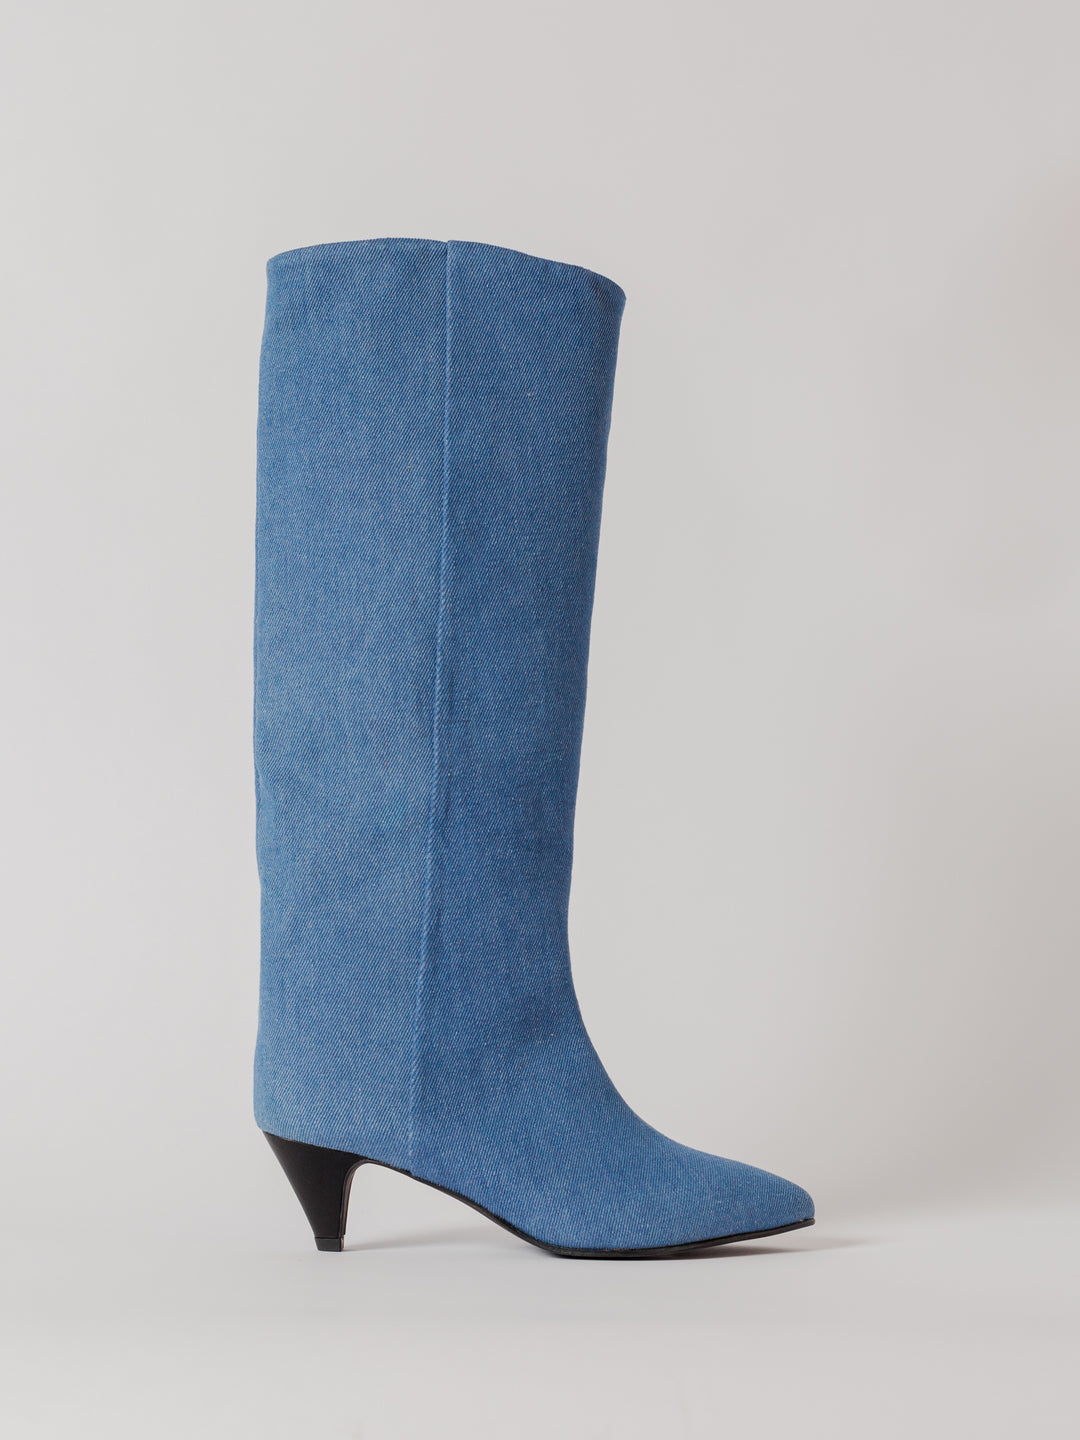 Blankens The Vanessa Tall Denim. high boot, walkable heel height. straight shaft. Rubber mix sole. Inner lining in leather.